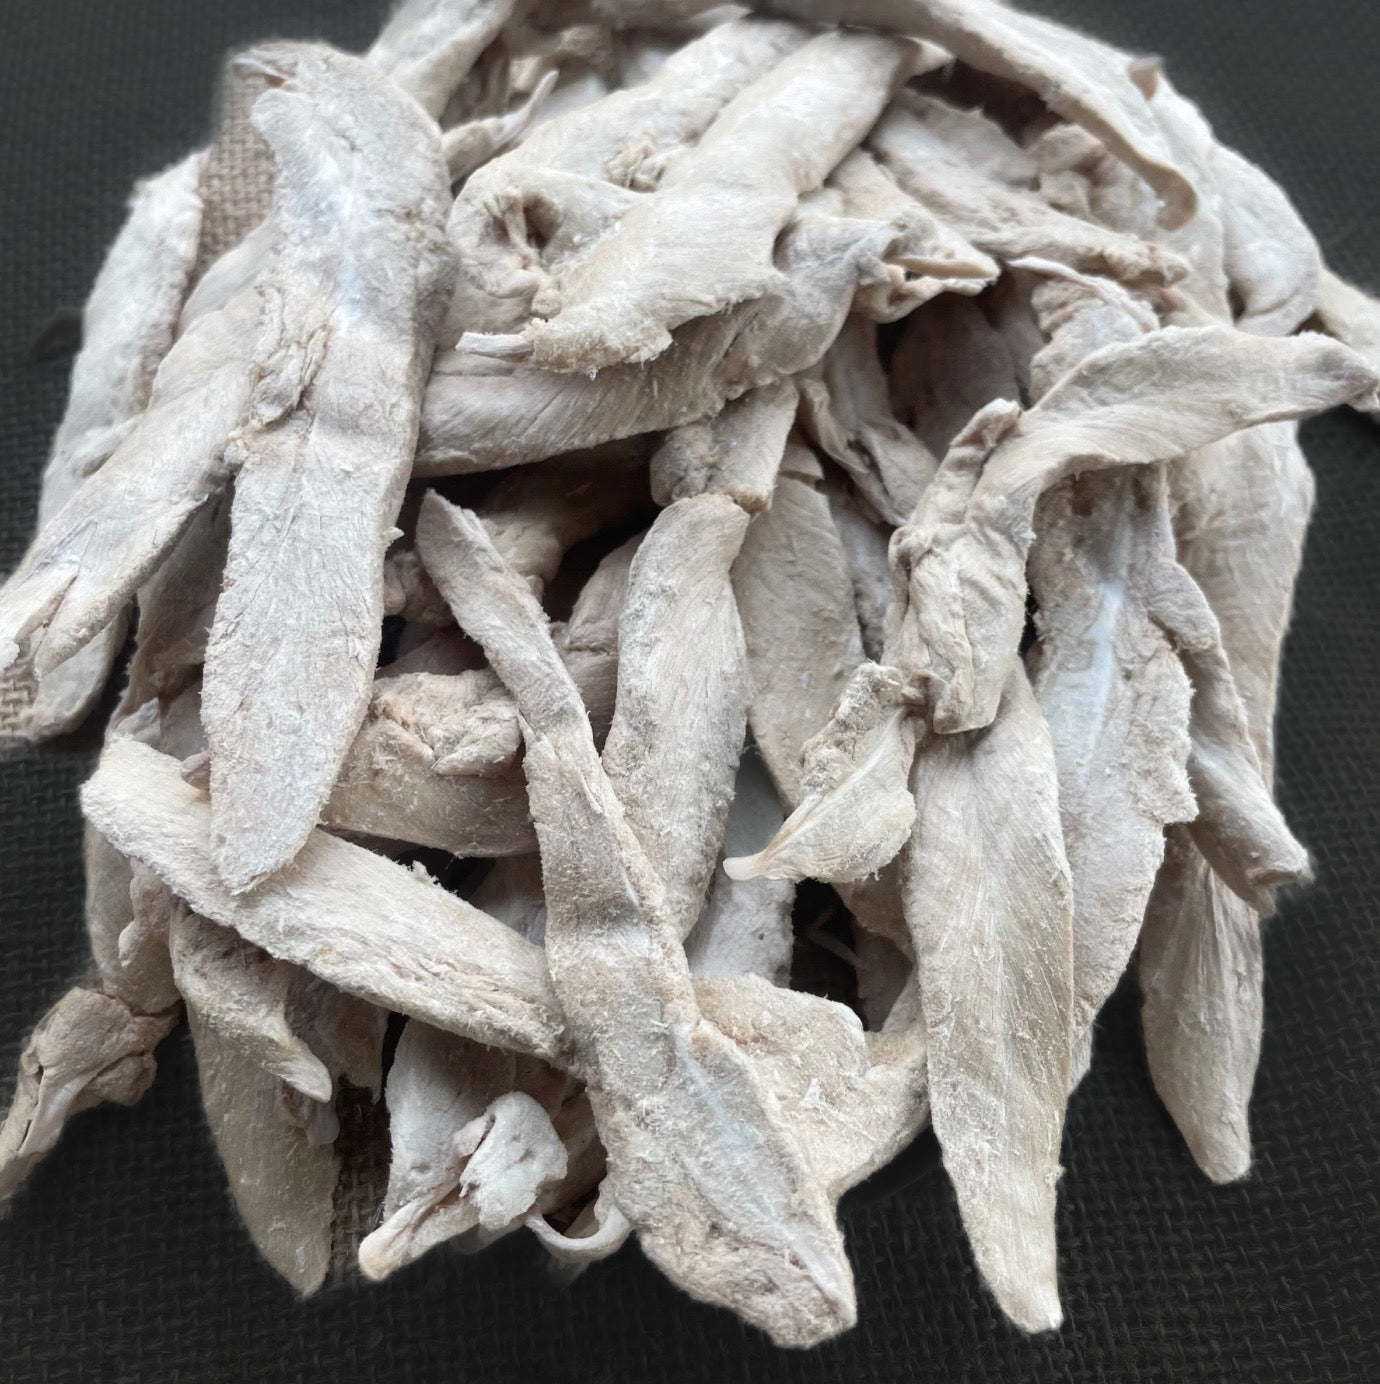 Duck Filet - Dehydrated makes it a great dog treat!